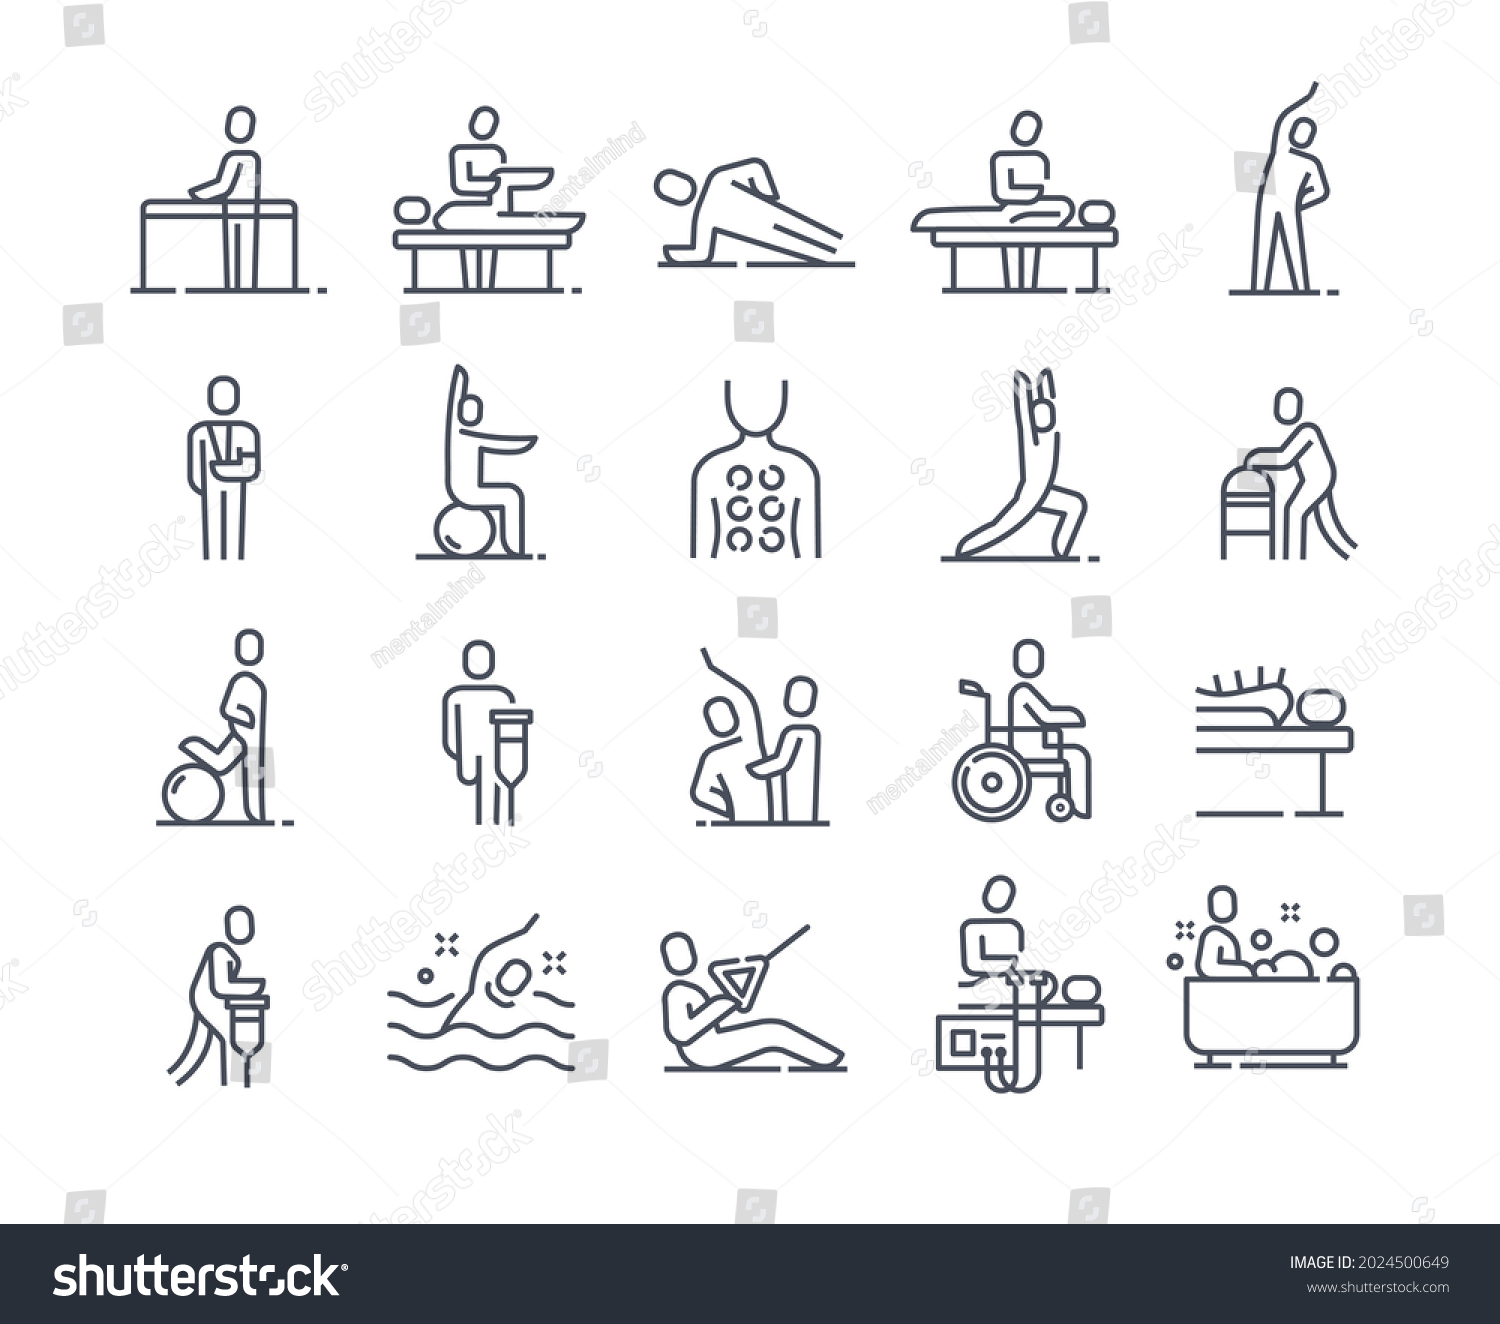 SVG of Set of linear essential icons of physiotherapy on white background. Concept of massotherapy and acupuncture, exercise, rehabilitation. Healthcare and medicine. Flat cartoon vector illustration svg